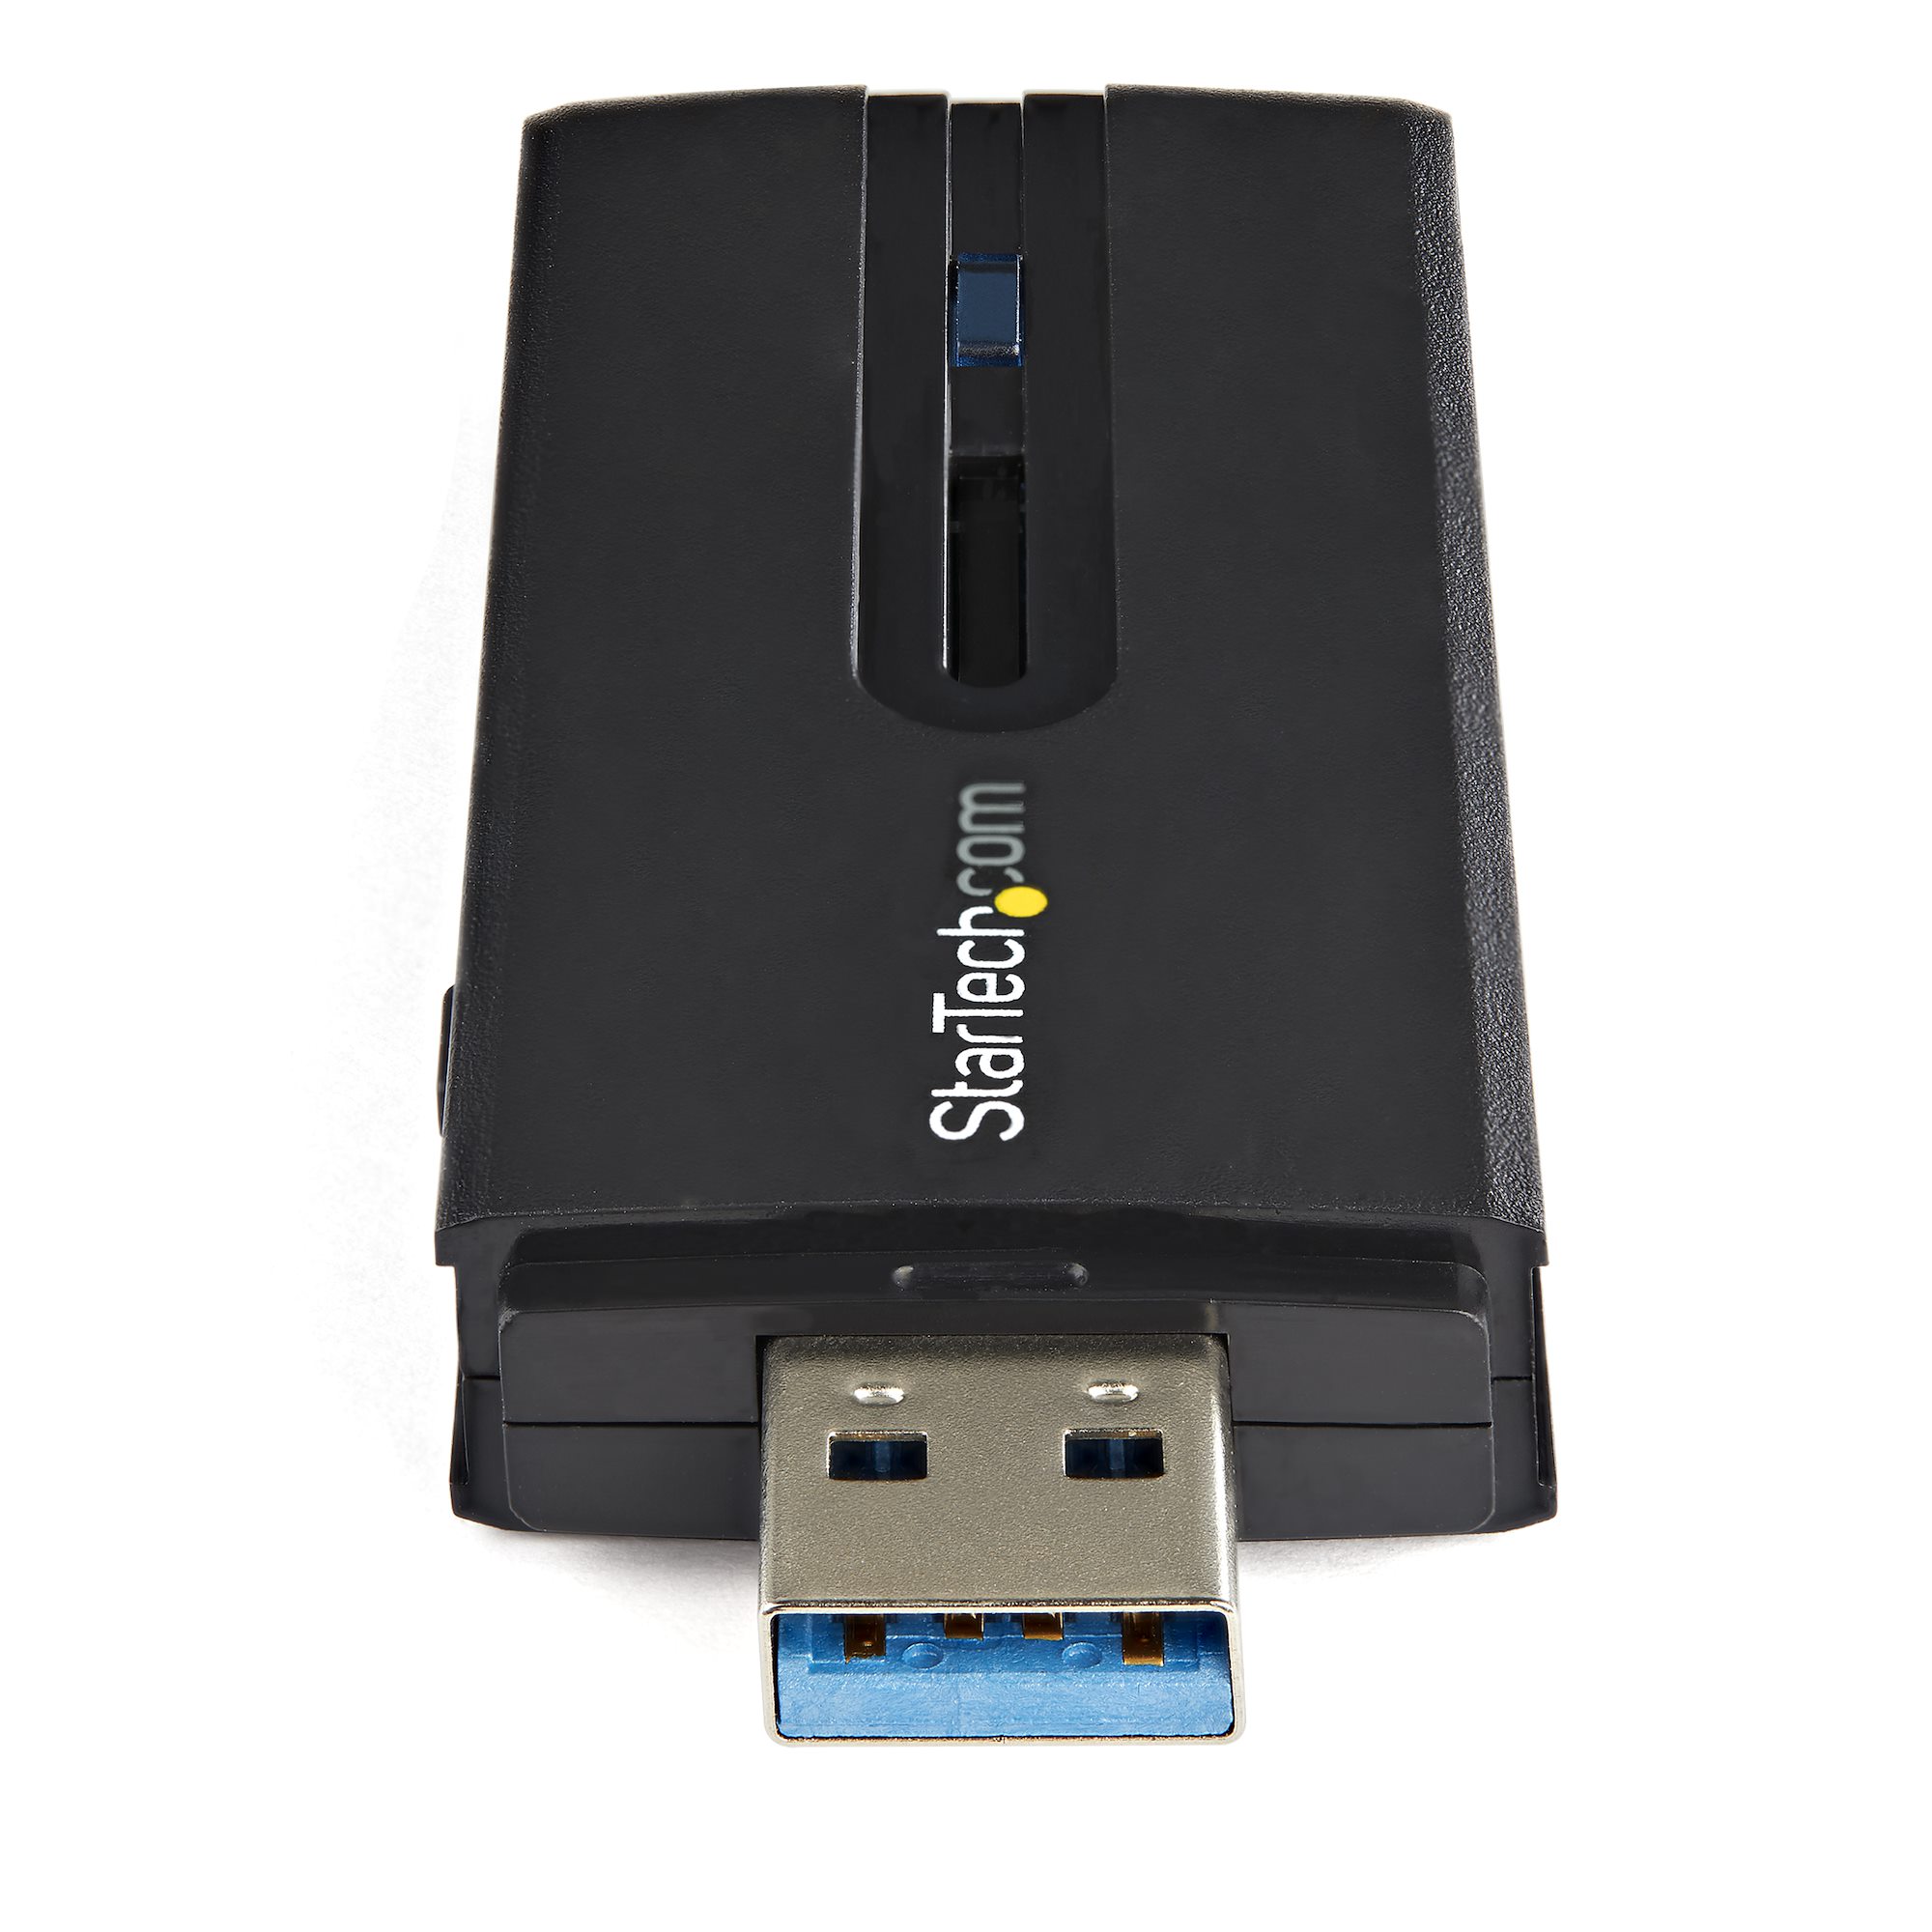 USB 3.0 AC1200 Wireless Network Adapter - Wireless Network Adapters, Networking  IO Products